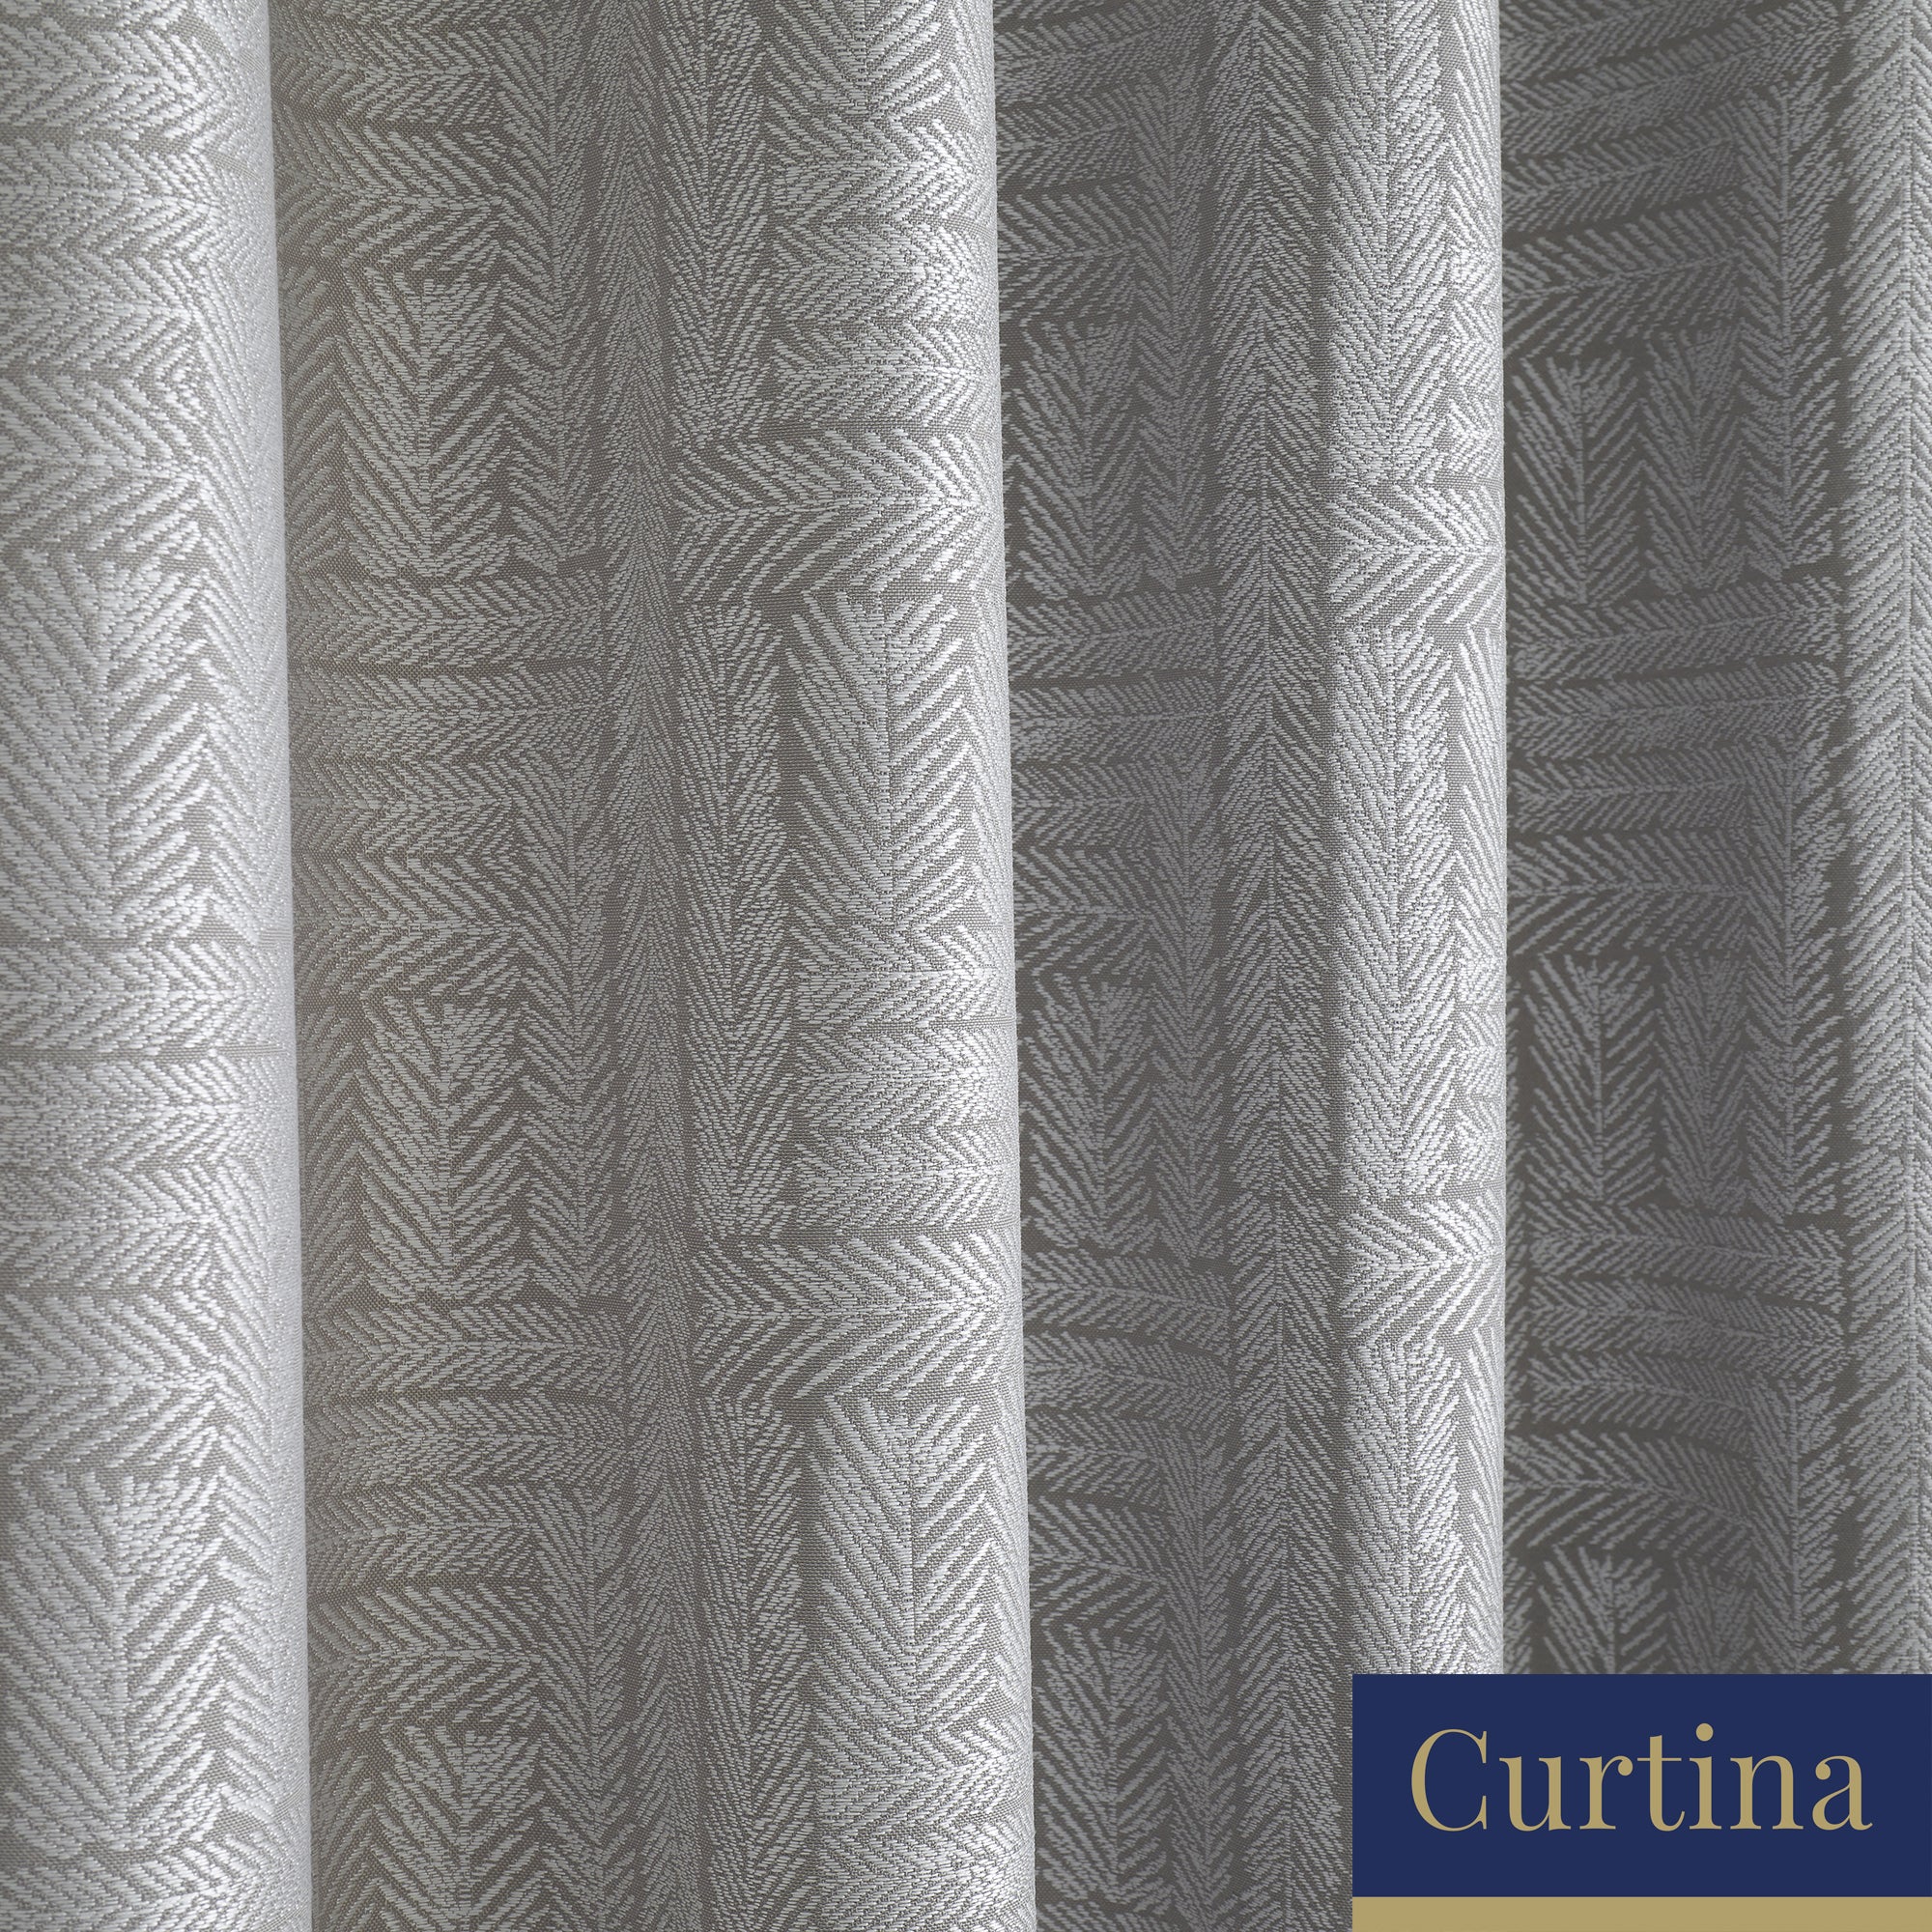 Lowe - Textured stripes Jacquard Eyelet Curtains in Charcoal - By Curtina